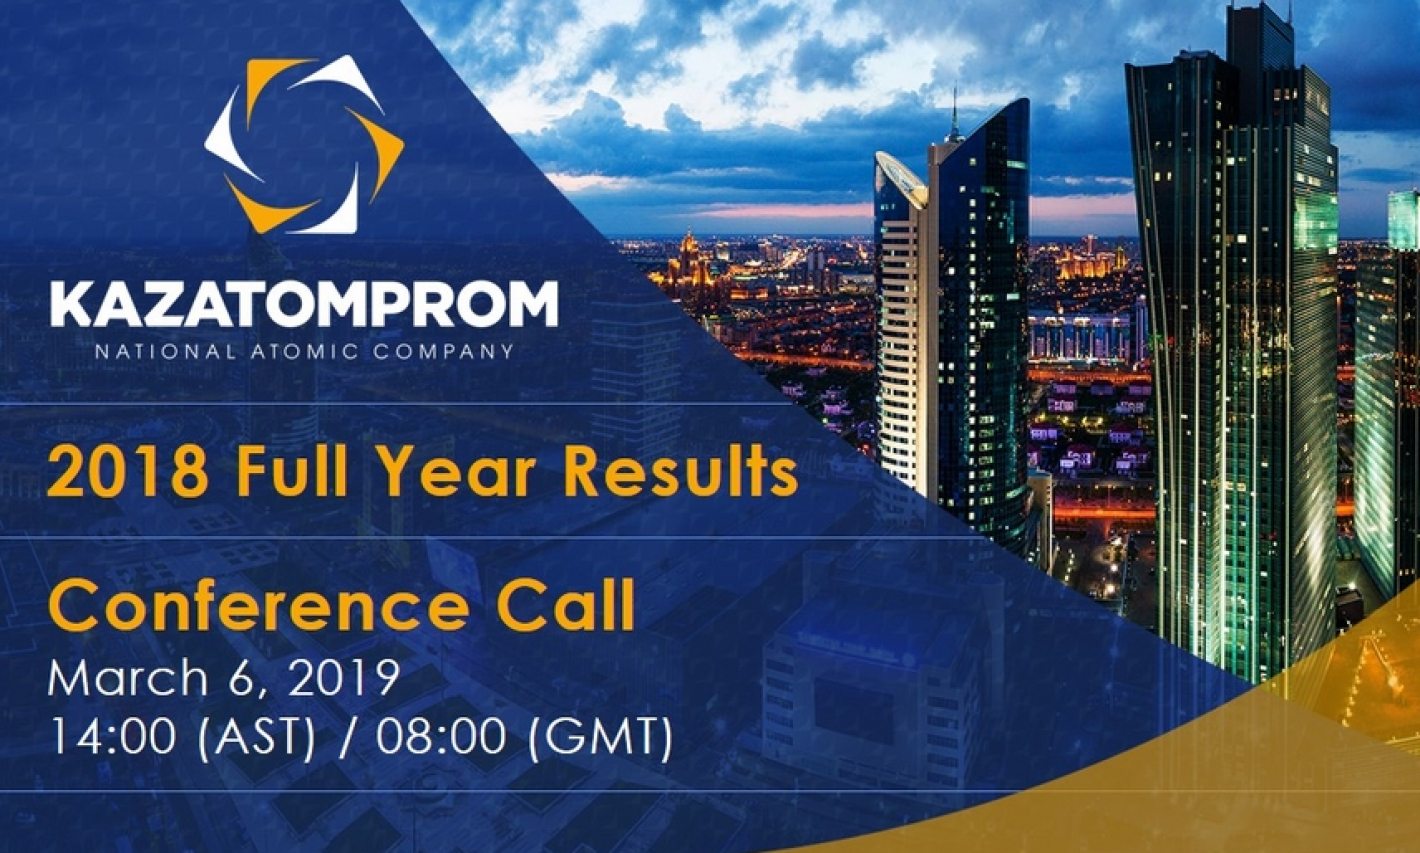 Kazatomprom 2018 Full Year Results Conference Call